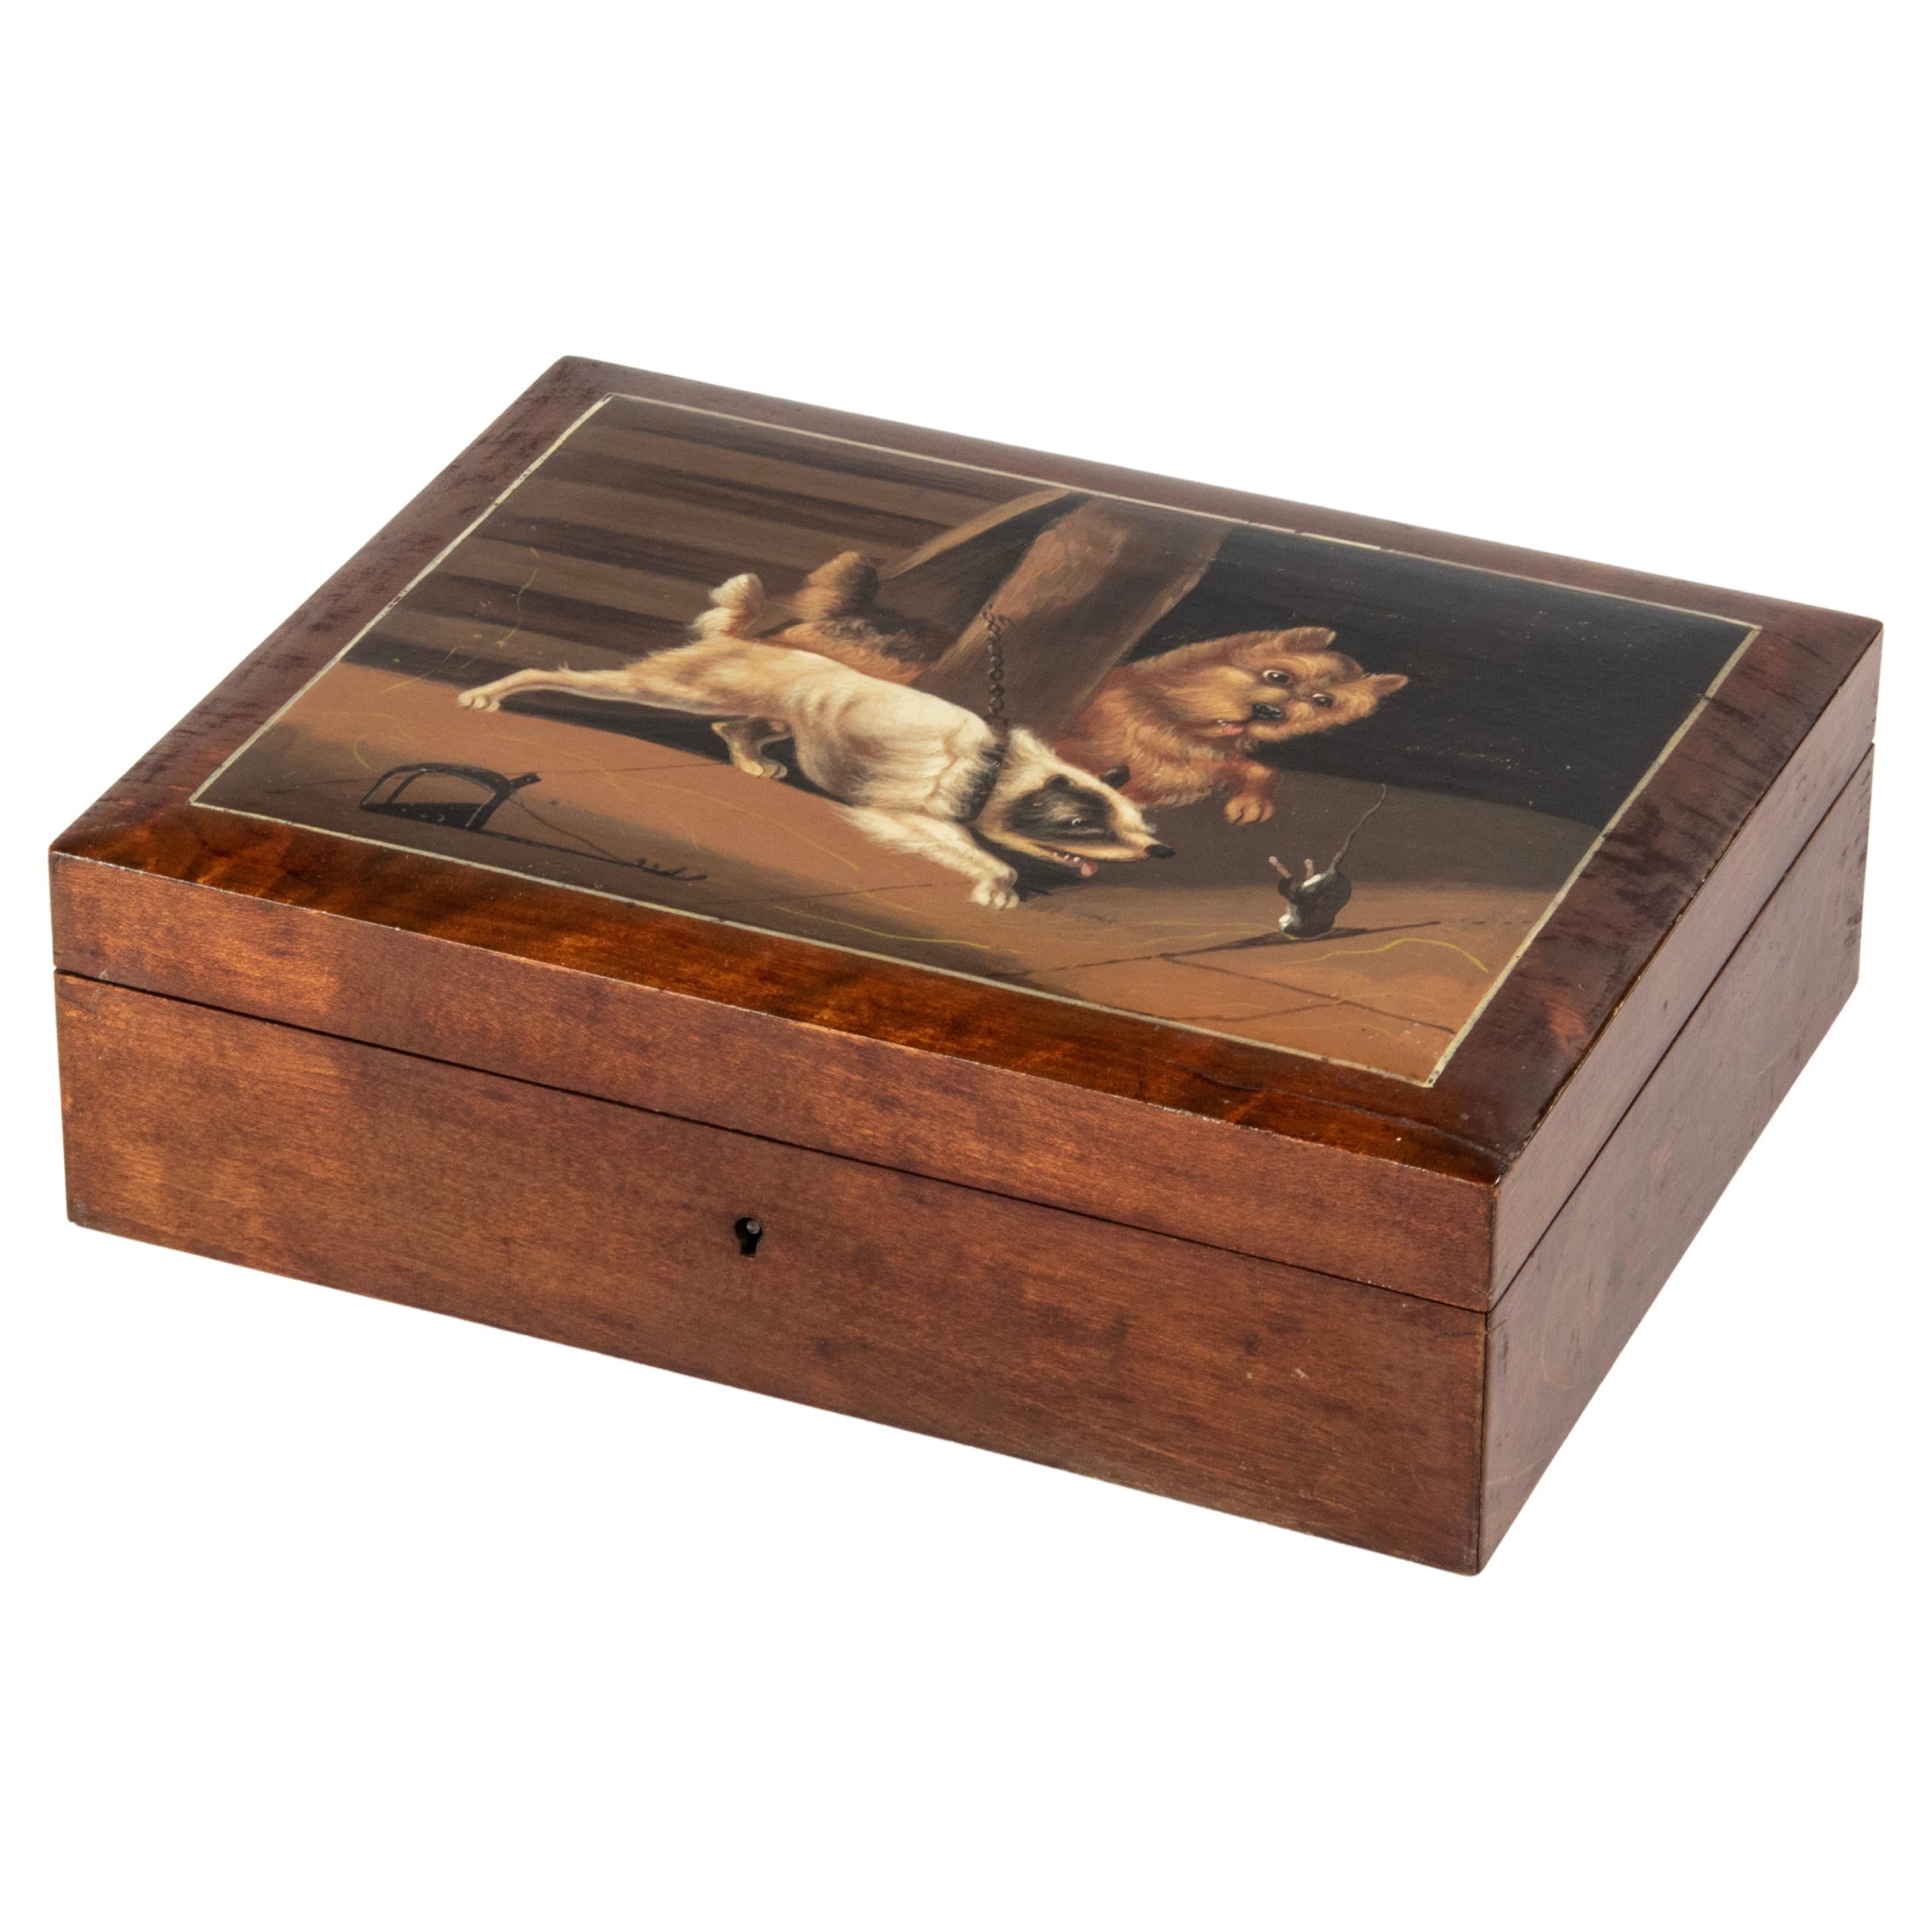 Late 19th Century Decorative Box with Dog Painting Lid